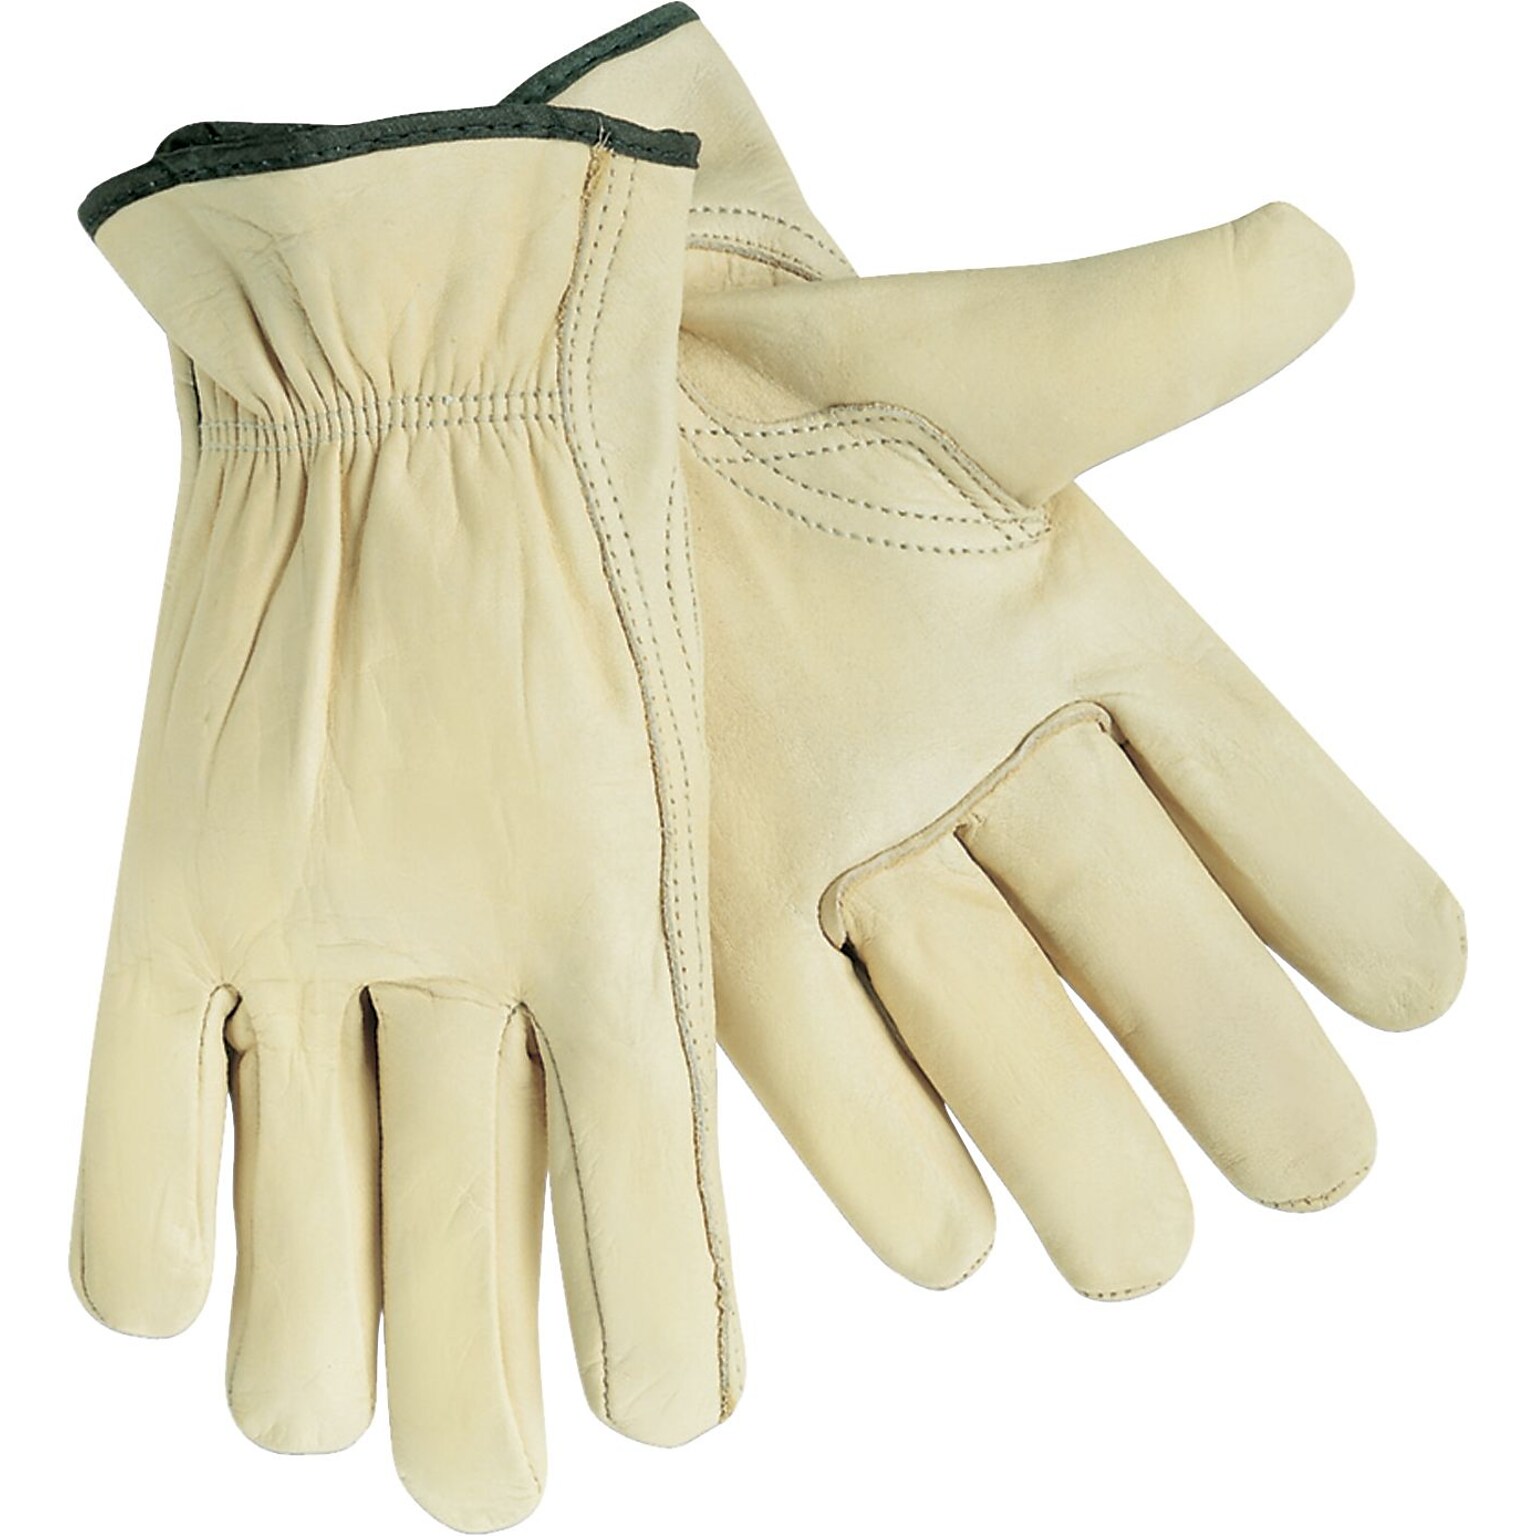 Memphis Gloves® Drivers Gloves, Cowhide Leather, Slip-On Cuff, L Size, Cream, 12 PRS